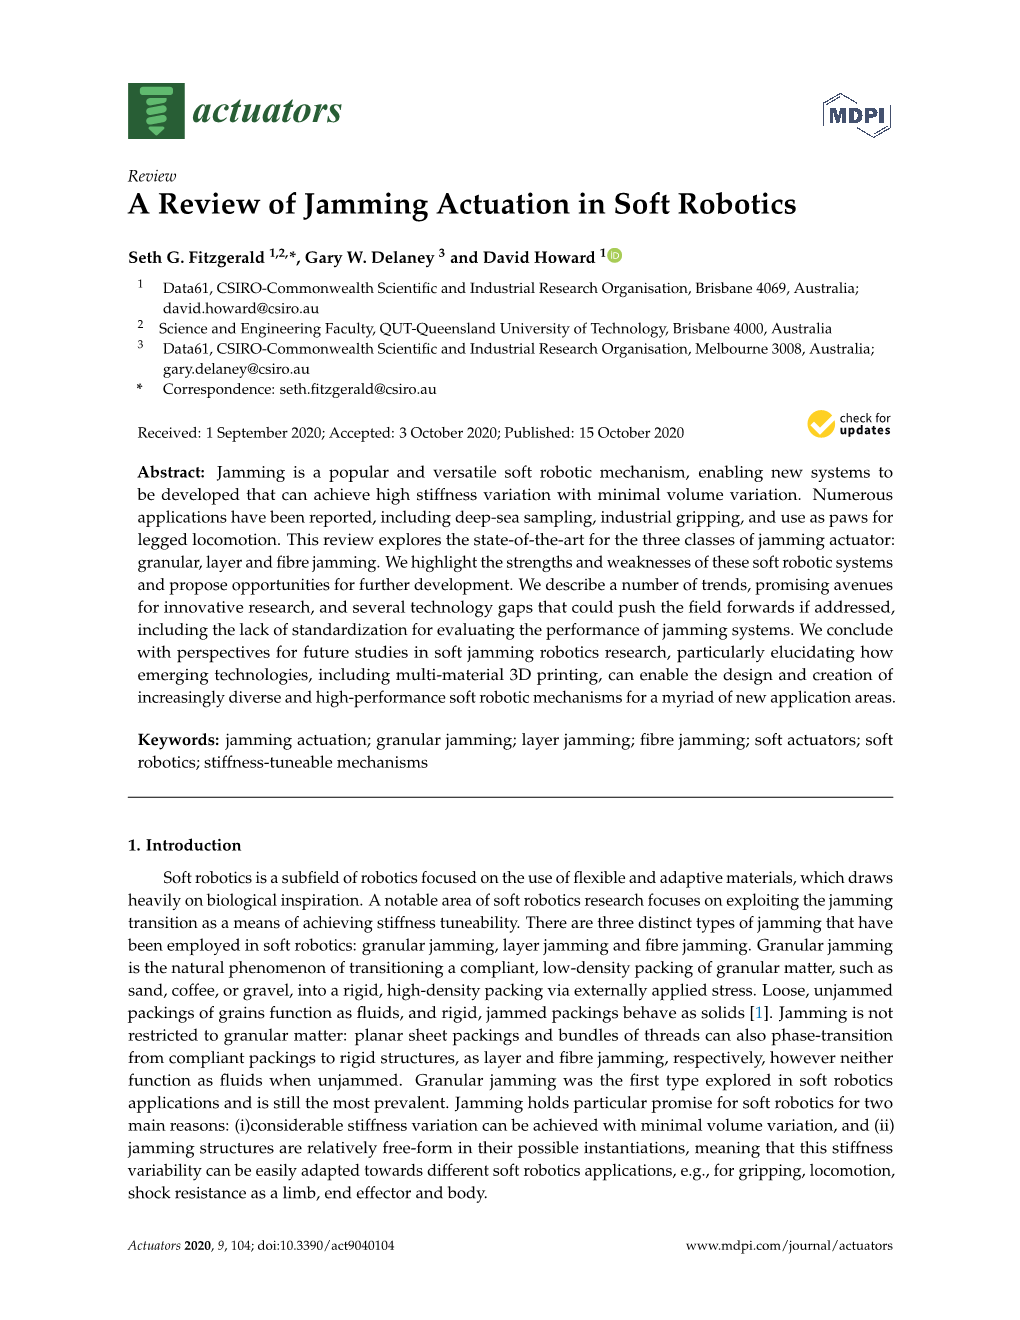 A Review of Jamming Actuation in Soft Robotics